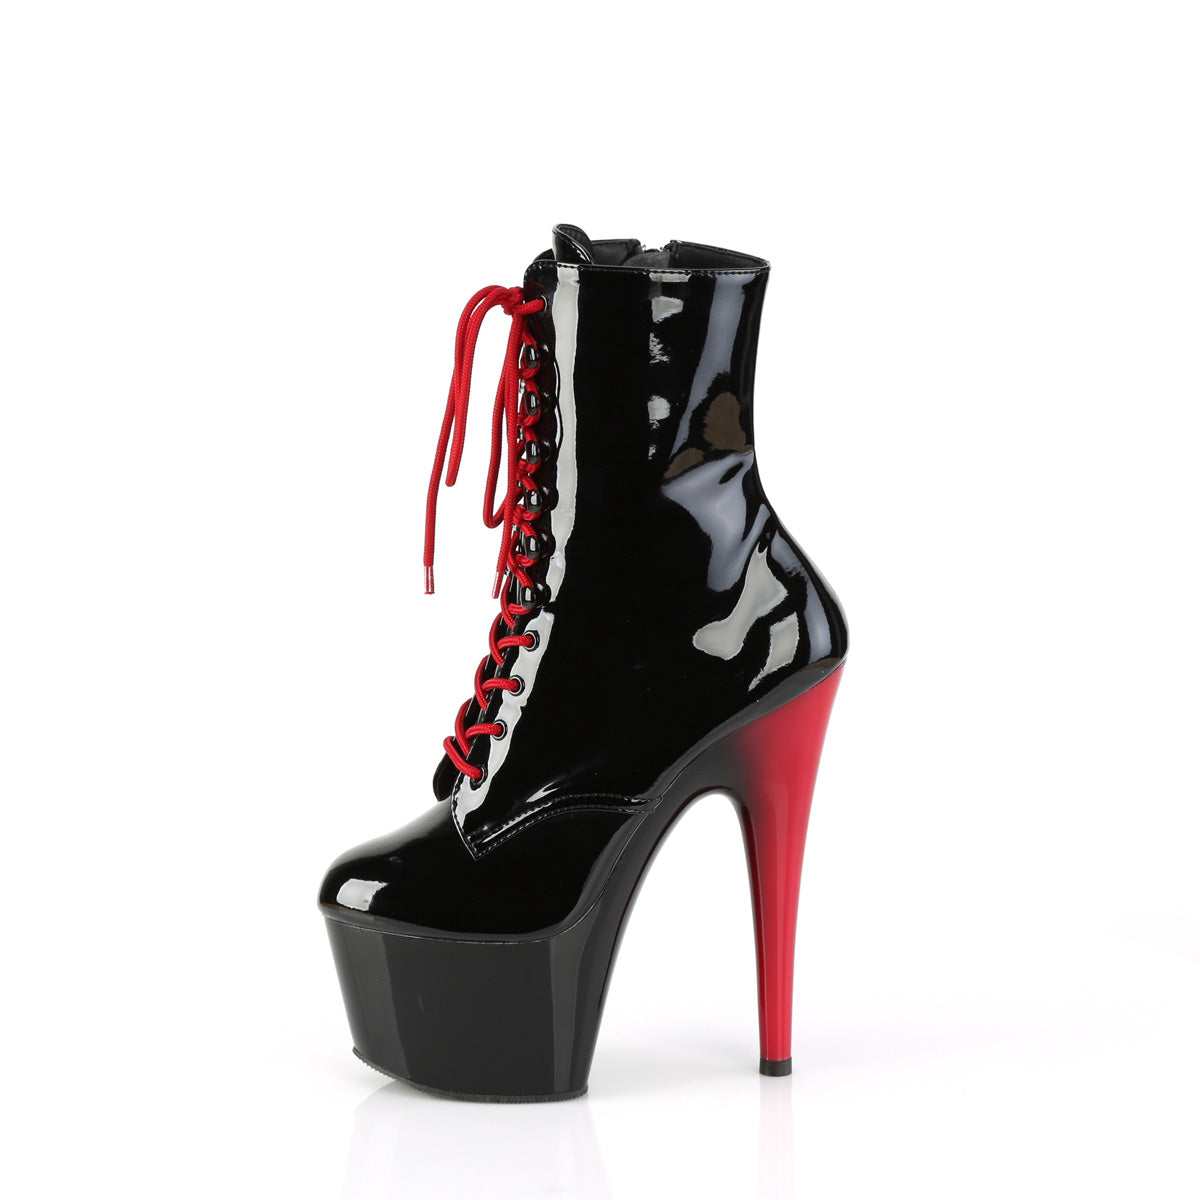 ADORE-1020 Pleaser Black Patent-Red Platform Shoes [Sexy Footwear]